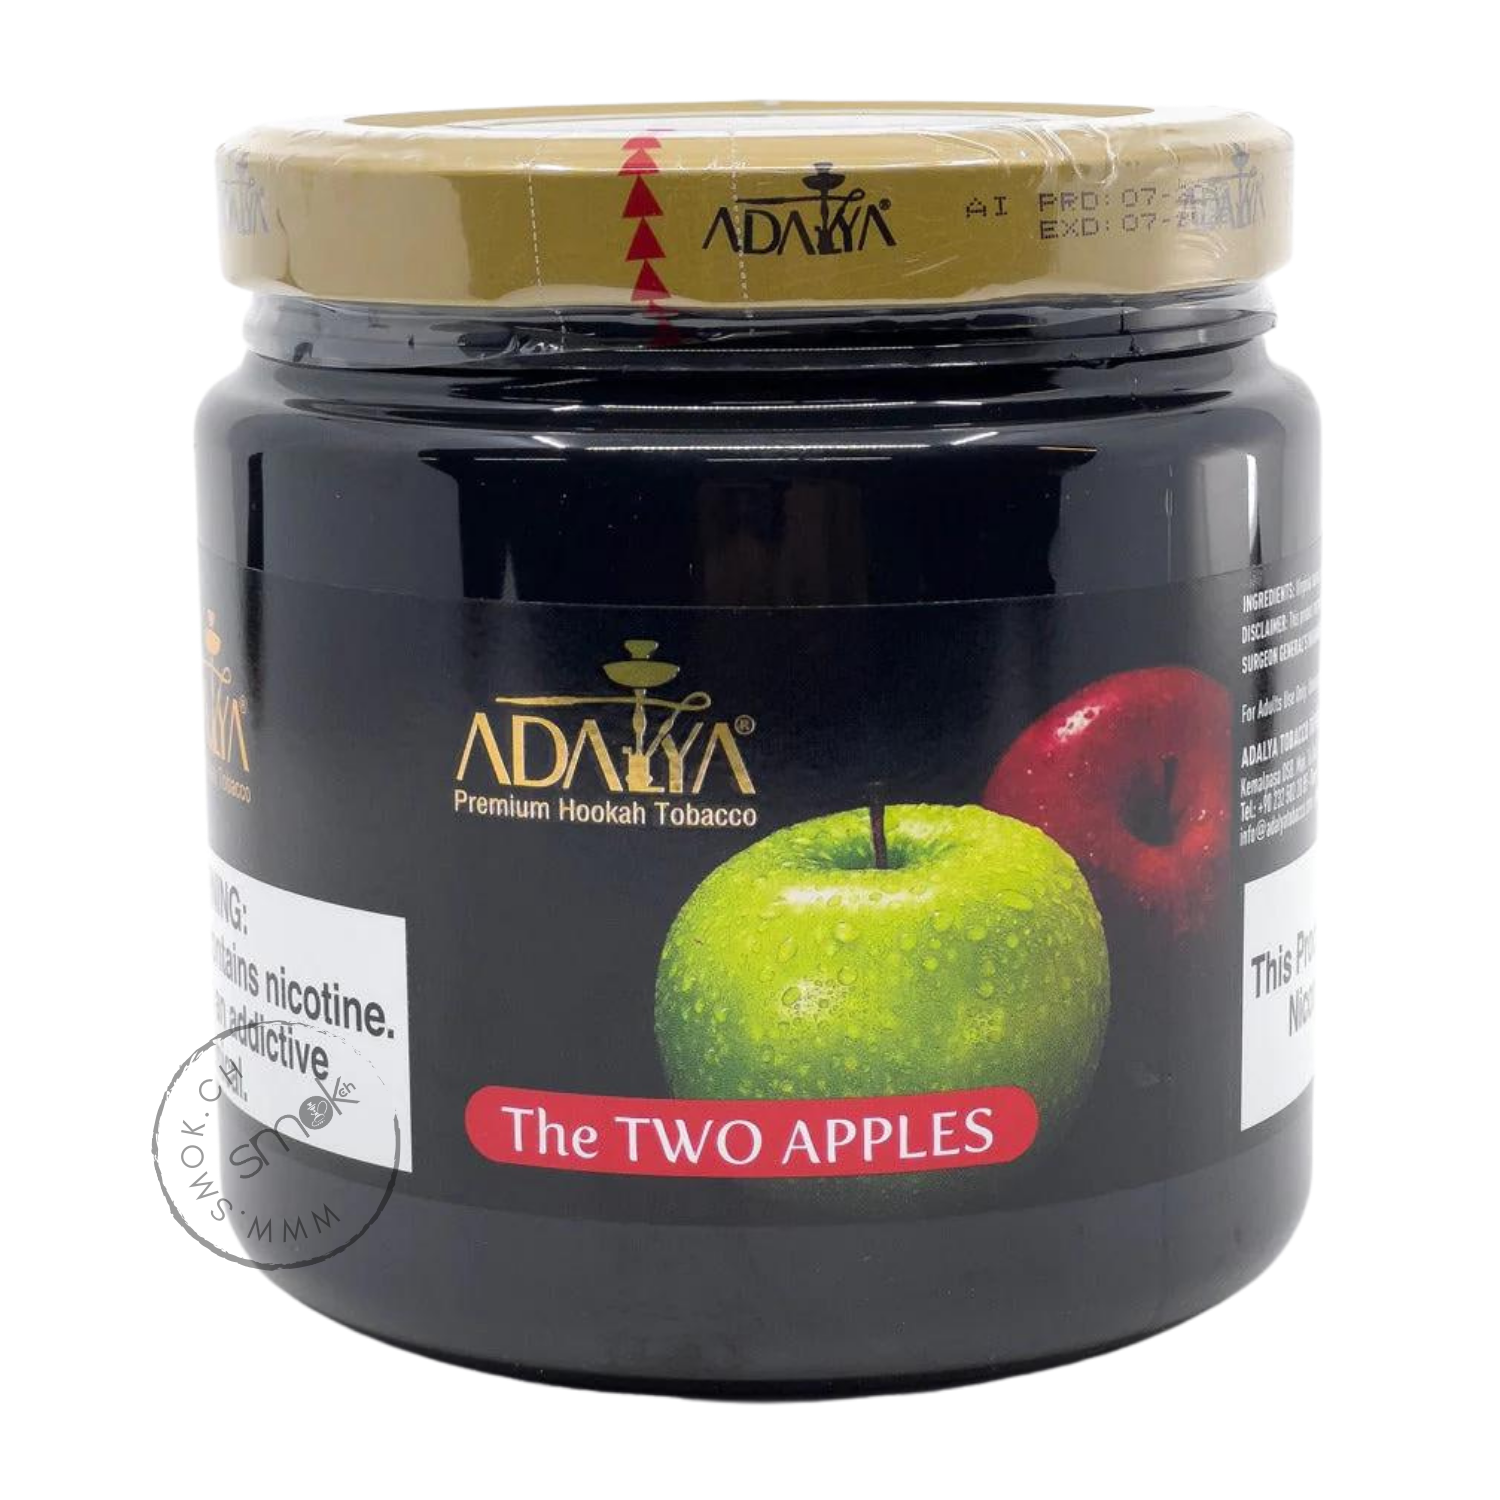 The Two Apples 1kg